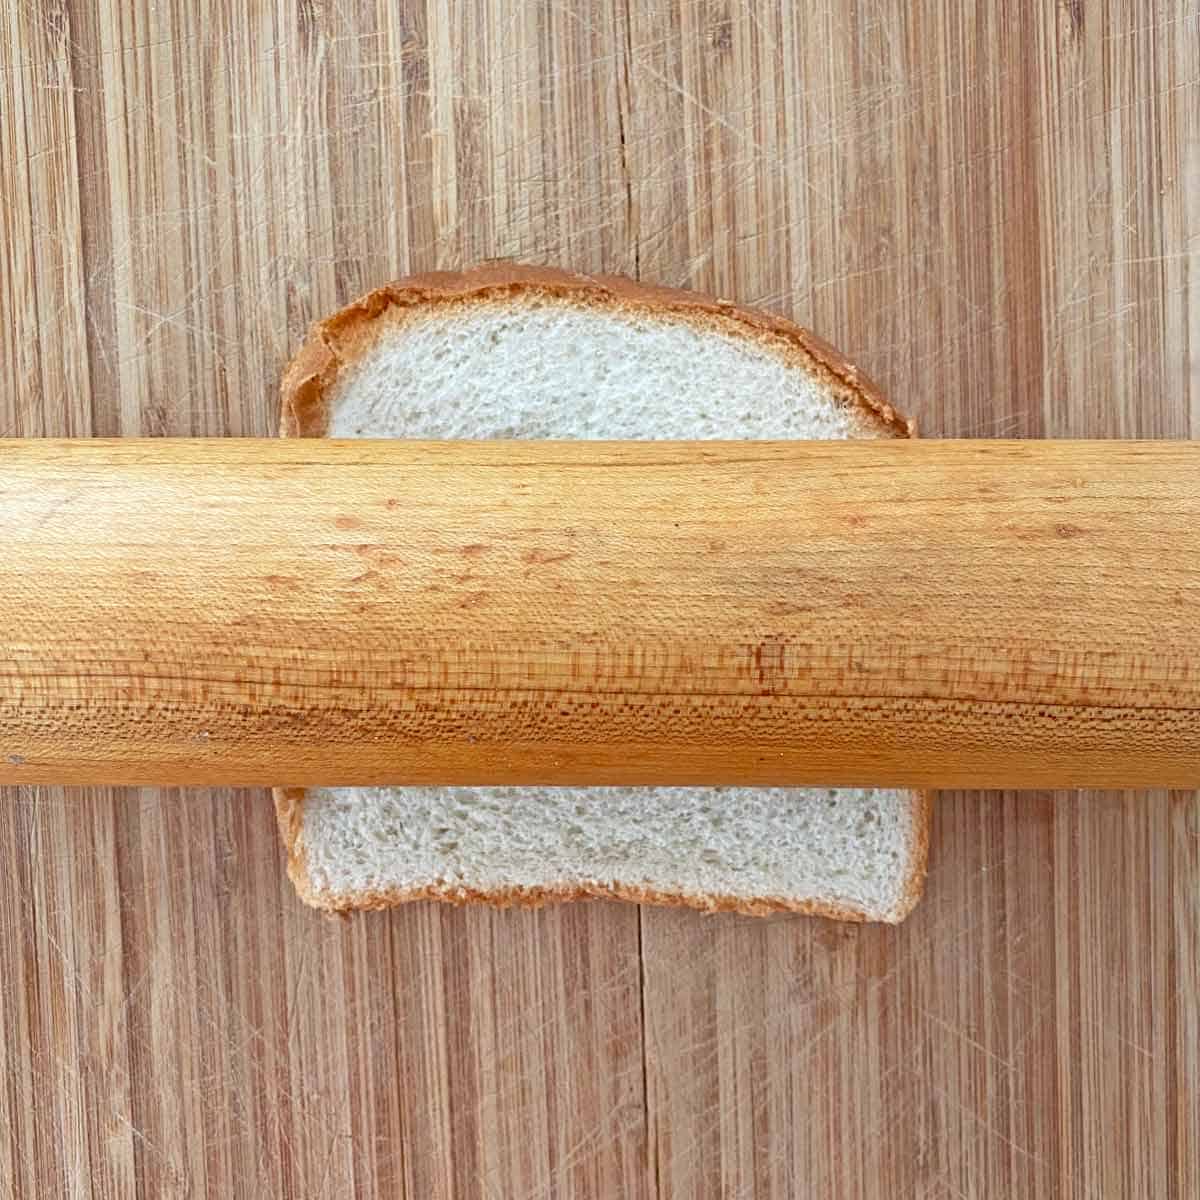 Rolling a piece of white bread with a rolling pin on a cutting board.